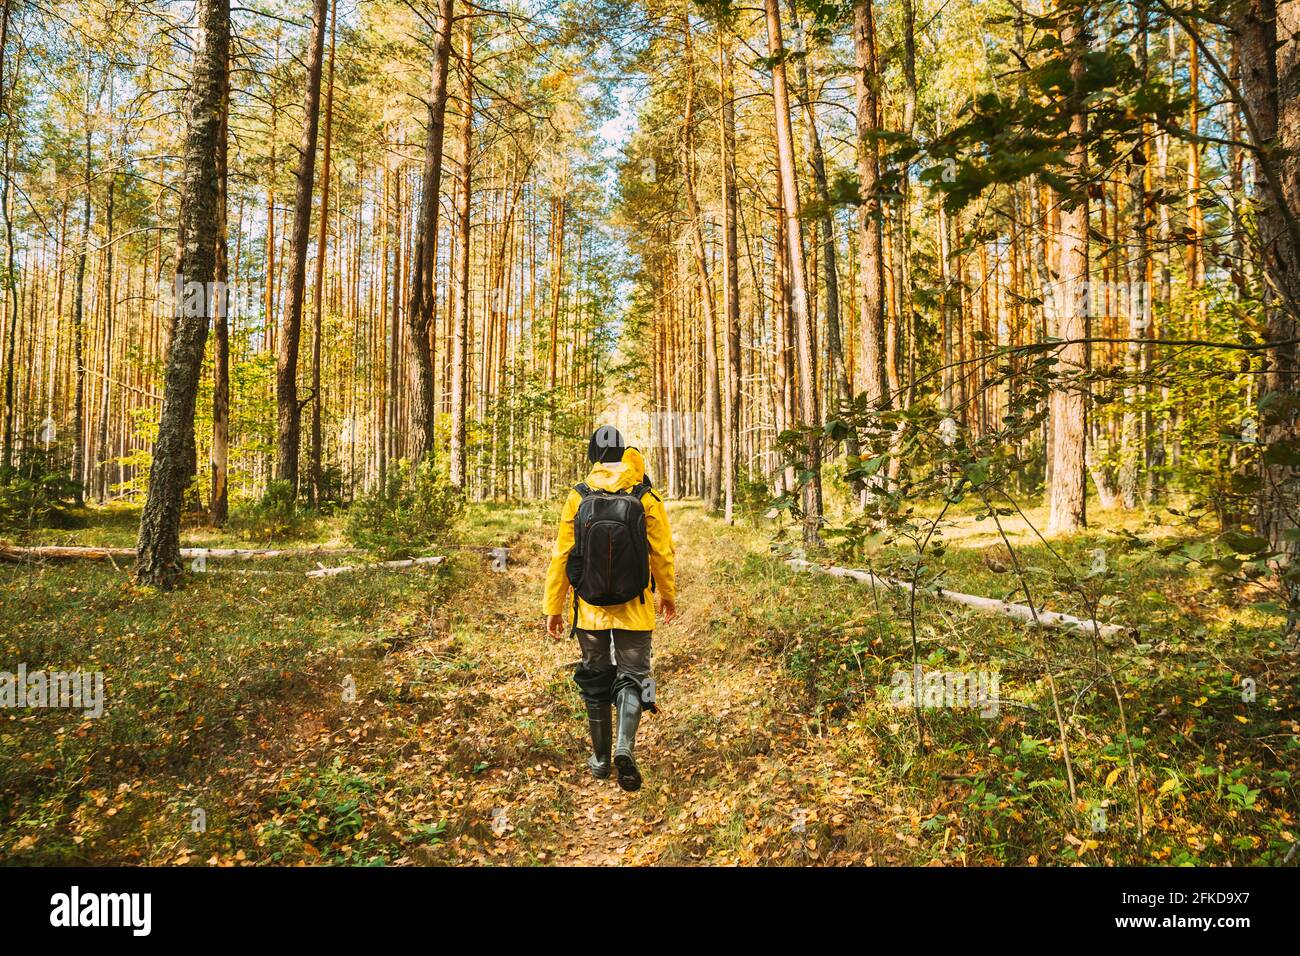 Young Woman Tourist Lady Dressed In Yellow Jacket Of Autumn Forest. Hiker Walking In Fall Mixed Forest In Sunny Day. Active Lifestyle With Backpack Stock Photo